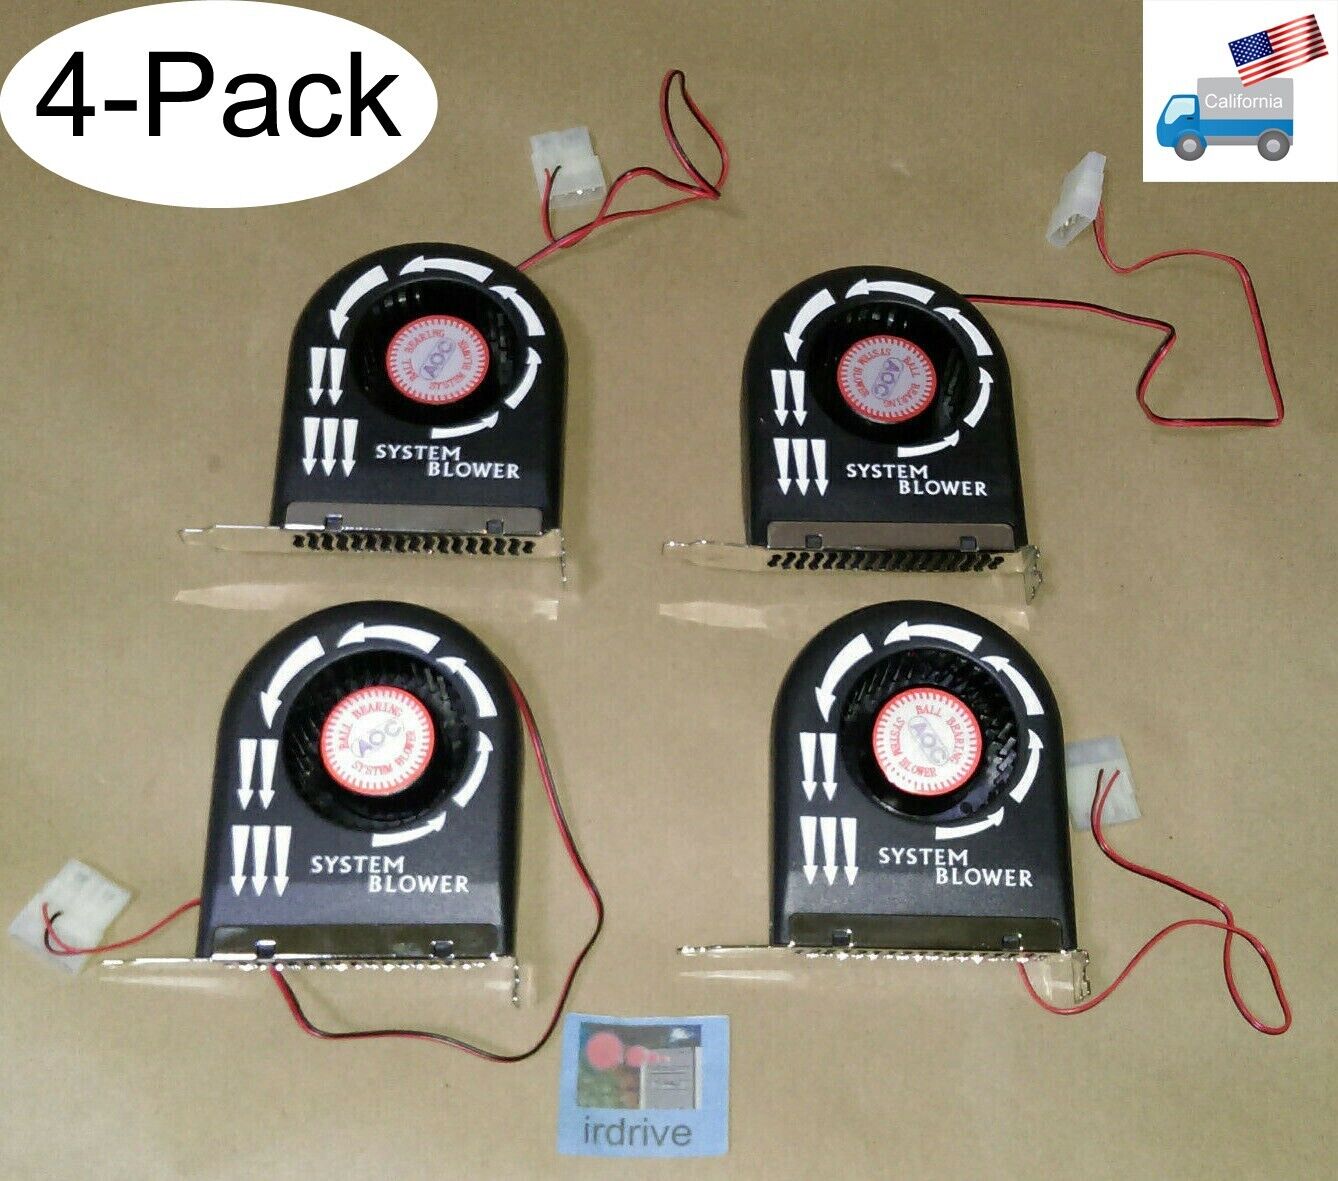 4-Pack: AOC High Airflow Case PCI Slot Cooling System Ball Bearing Blower Fans